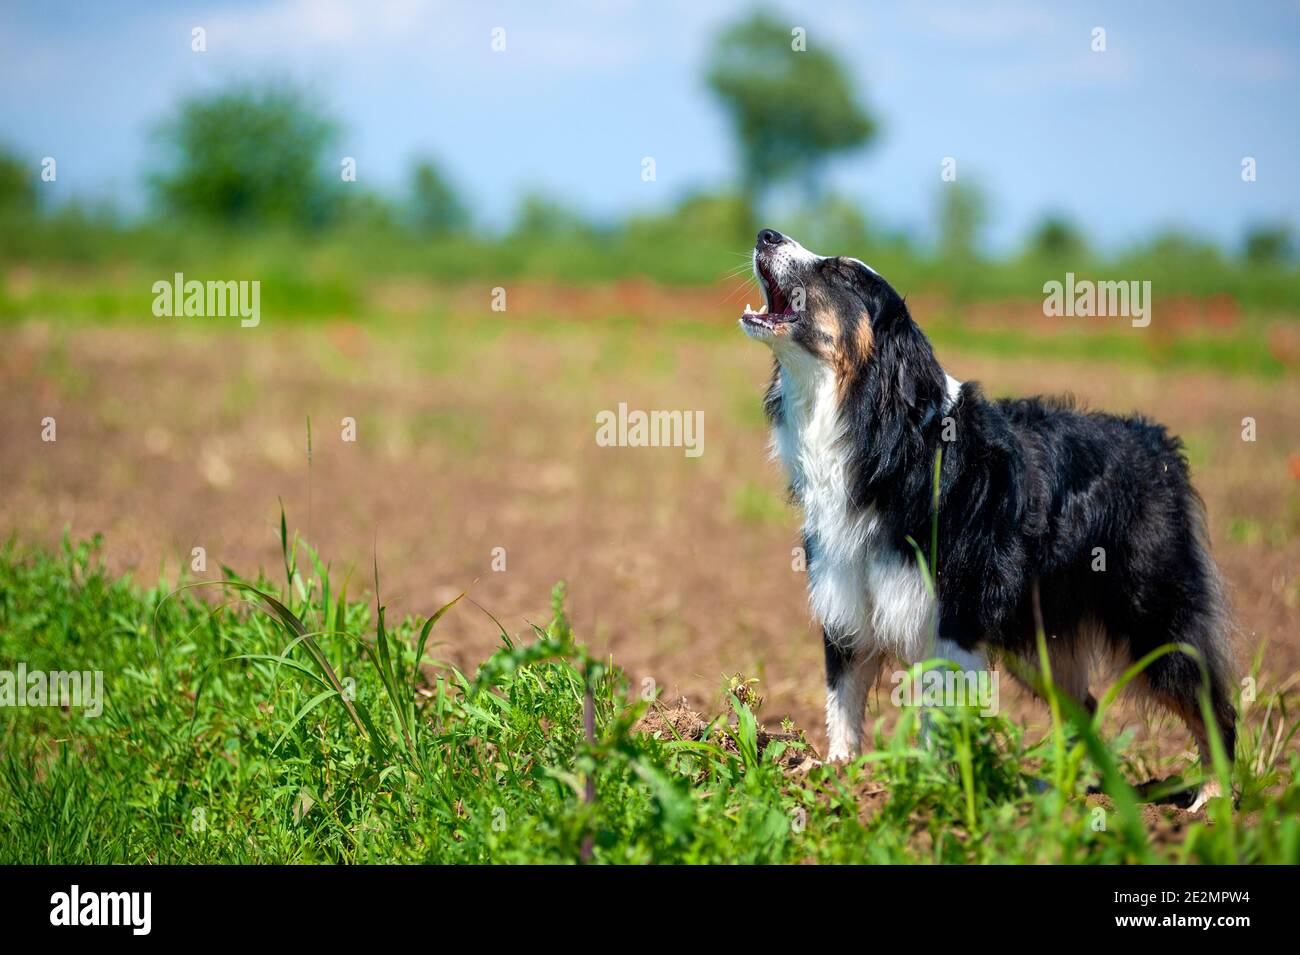 Australian Shepherd dog barking or howling. Dog is in the countryside and barking out loud Stock Photo